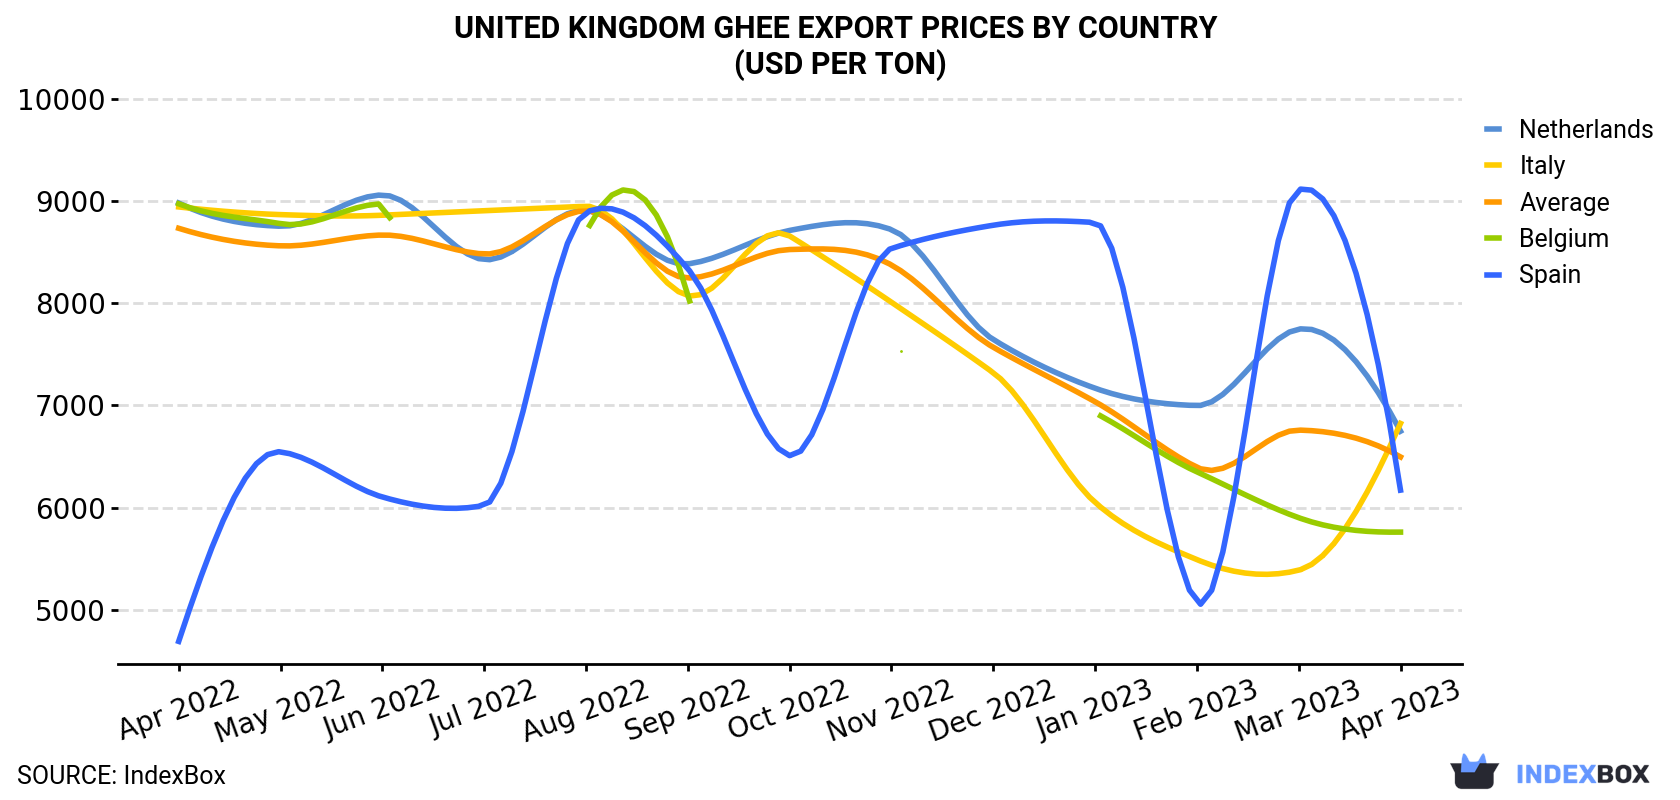 United Kingdom Ghee Export Prices By Country (USD Per Ton)